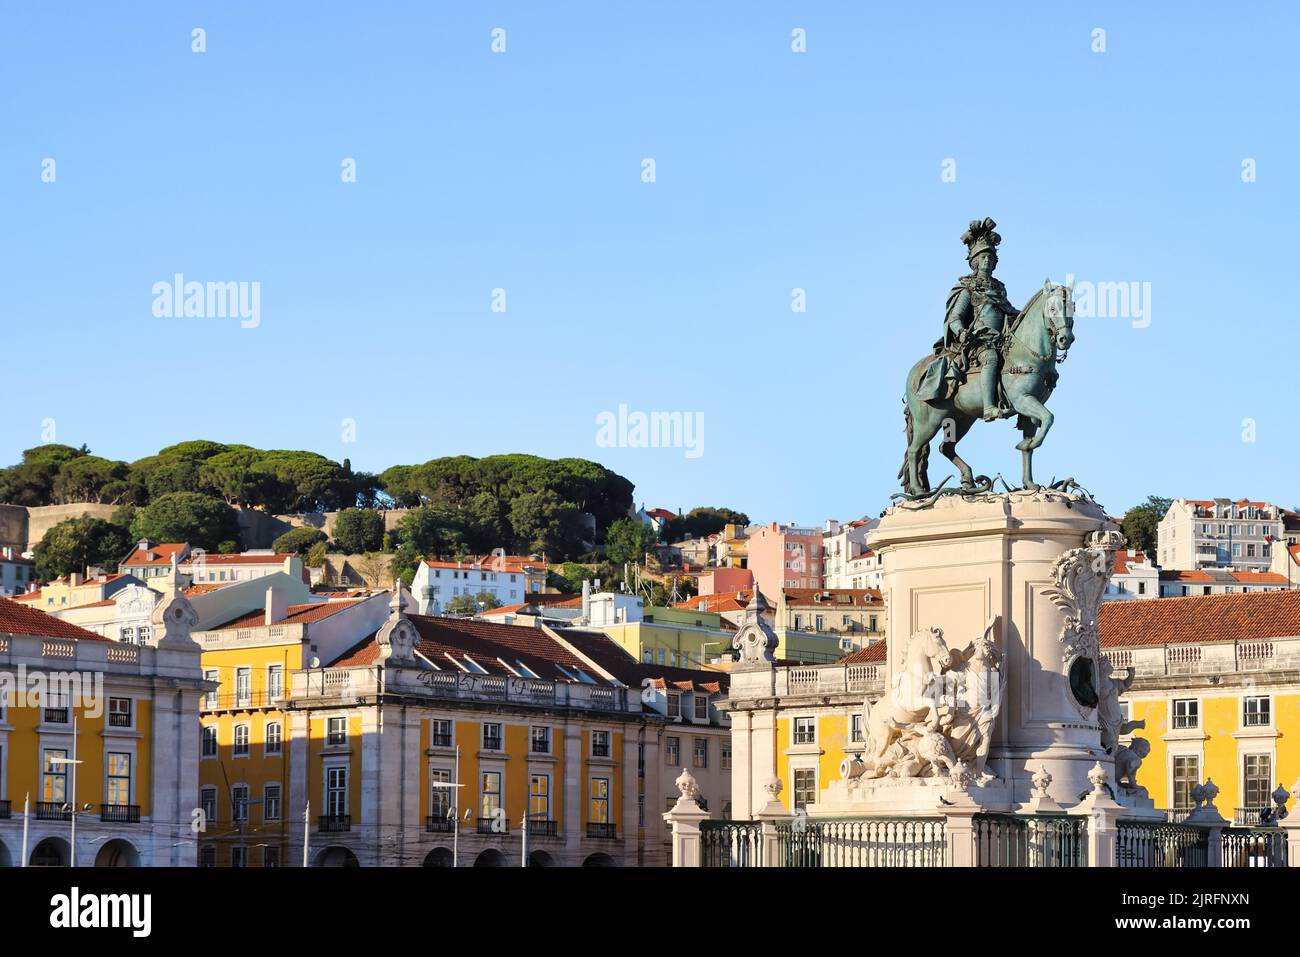 Lisbon, capital city of Portugal. Cityscape as seen from Praça do Comércio, Commerce Plaza with statue of King José I. Copy space, place your text. Stock Photo